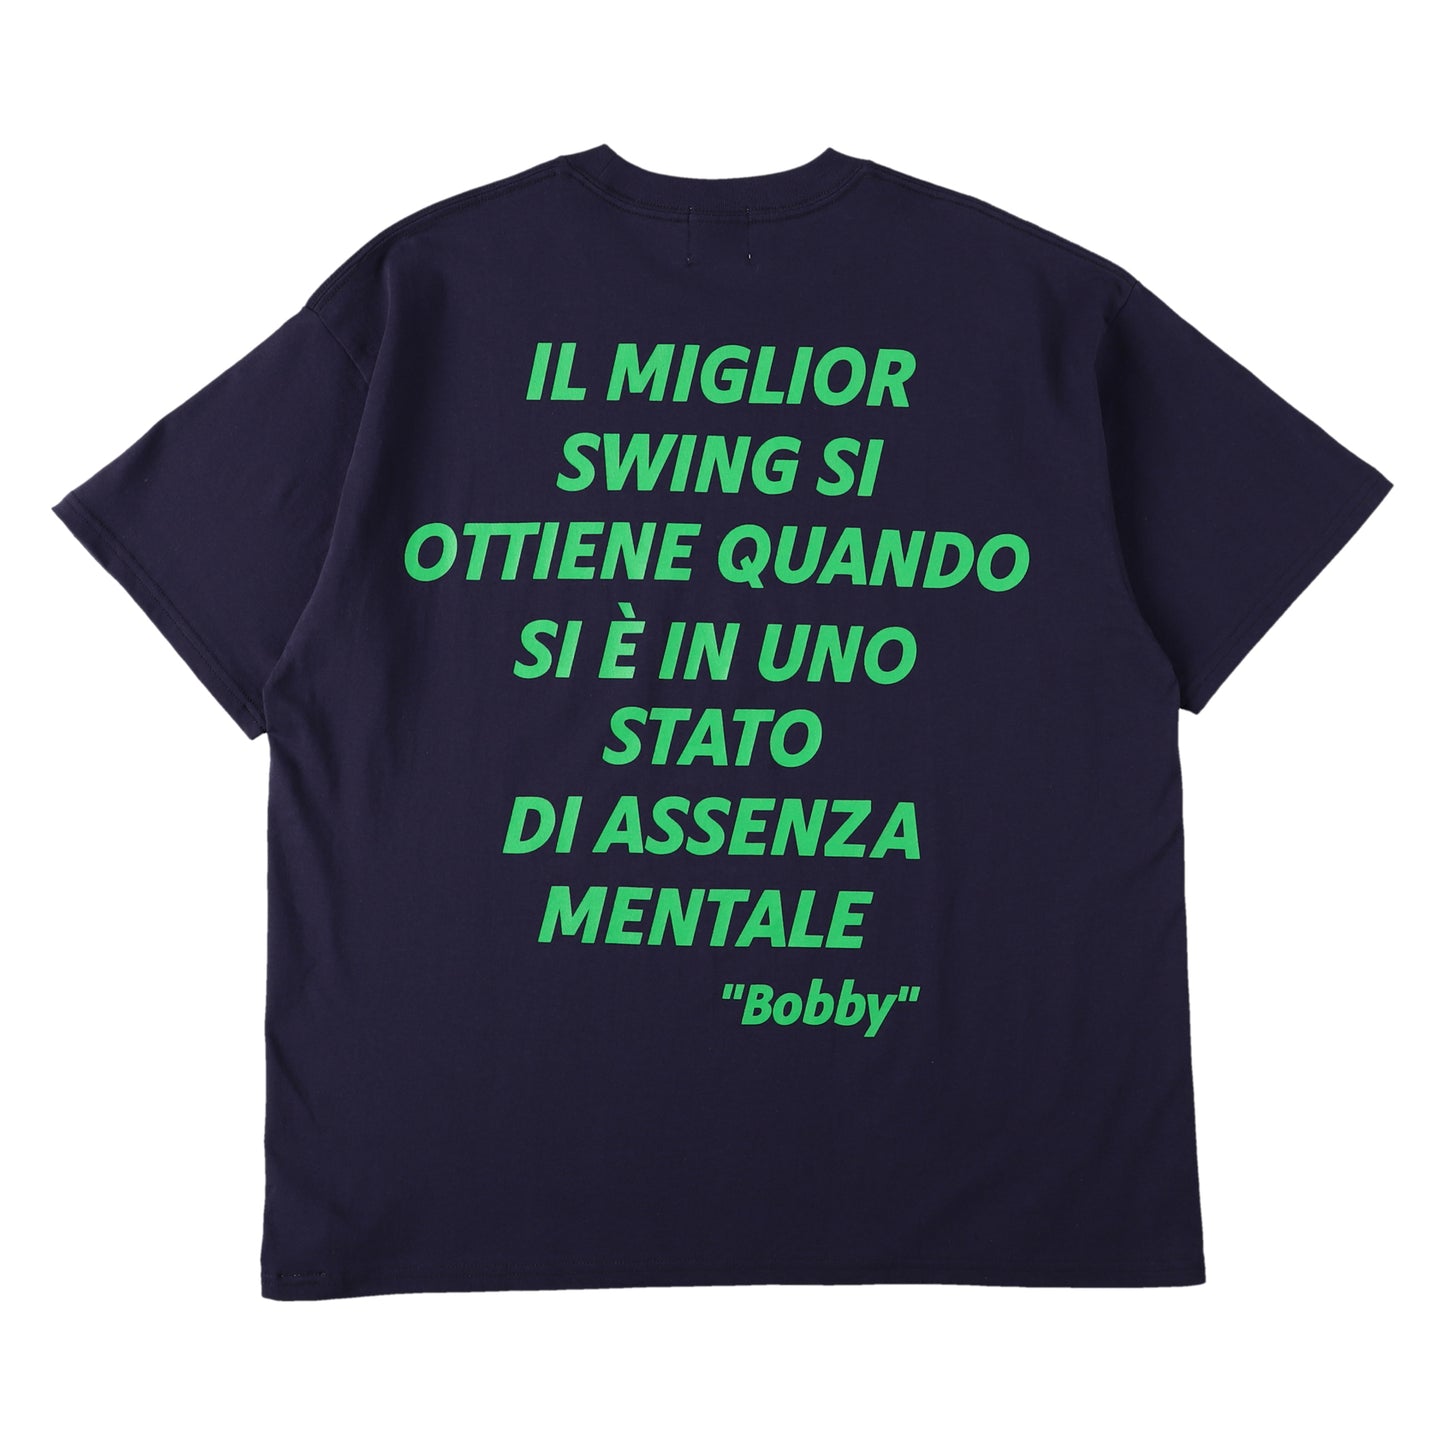 FAMOUS QUOTE Tee  "Bobby"